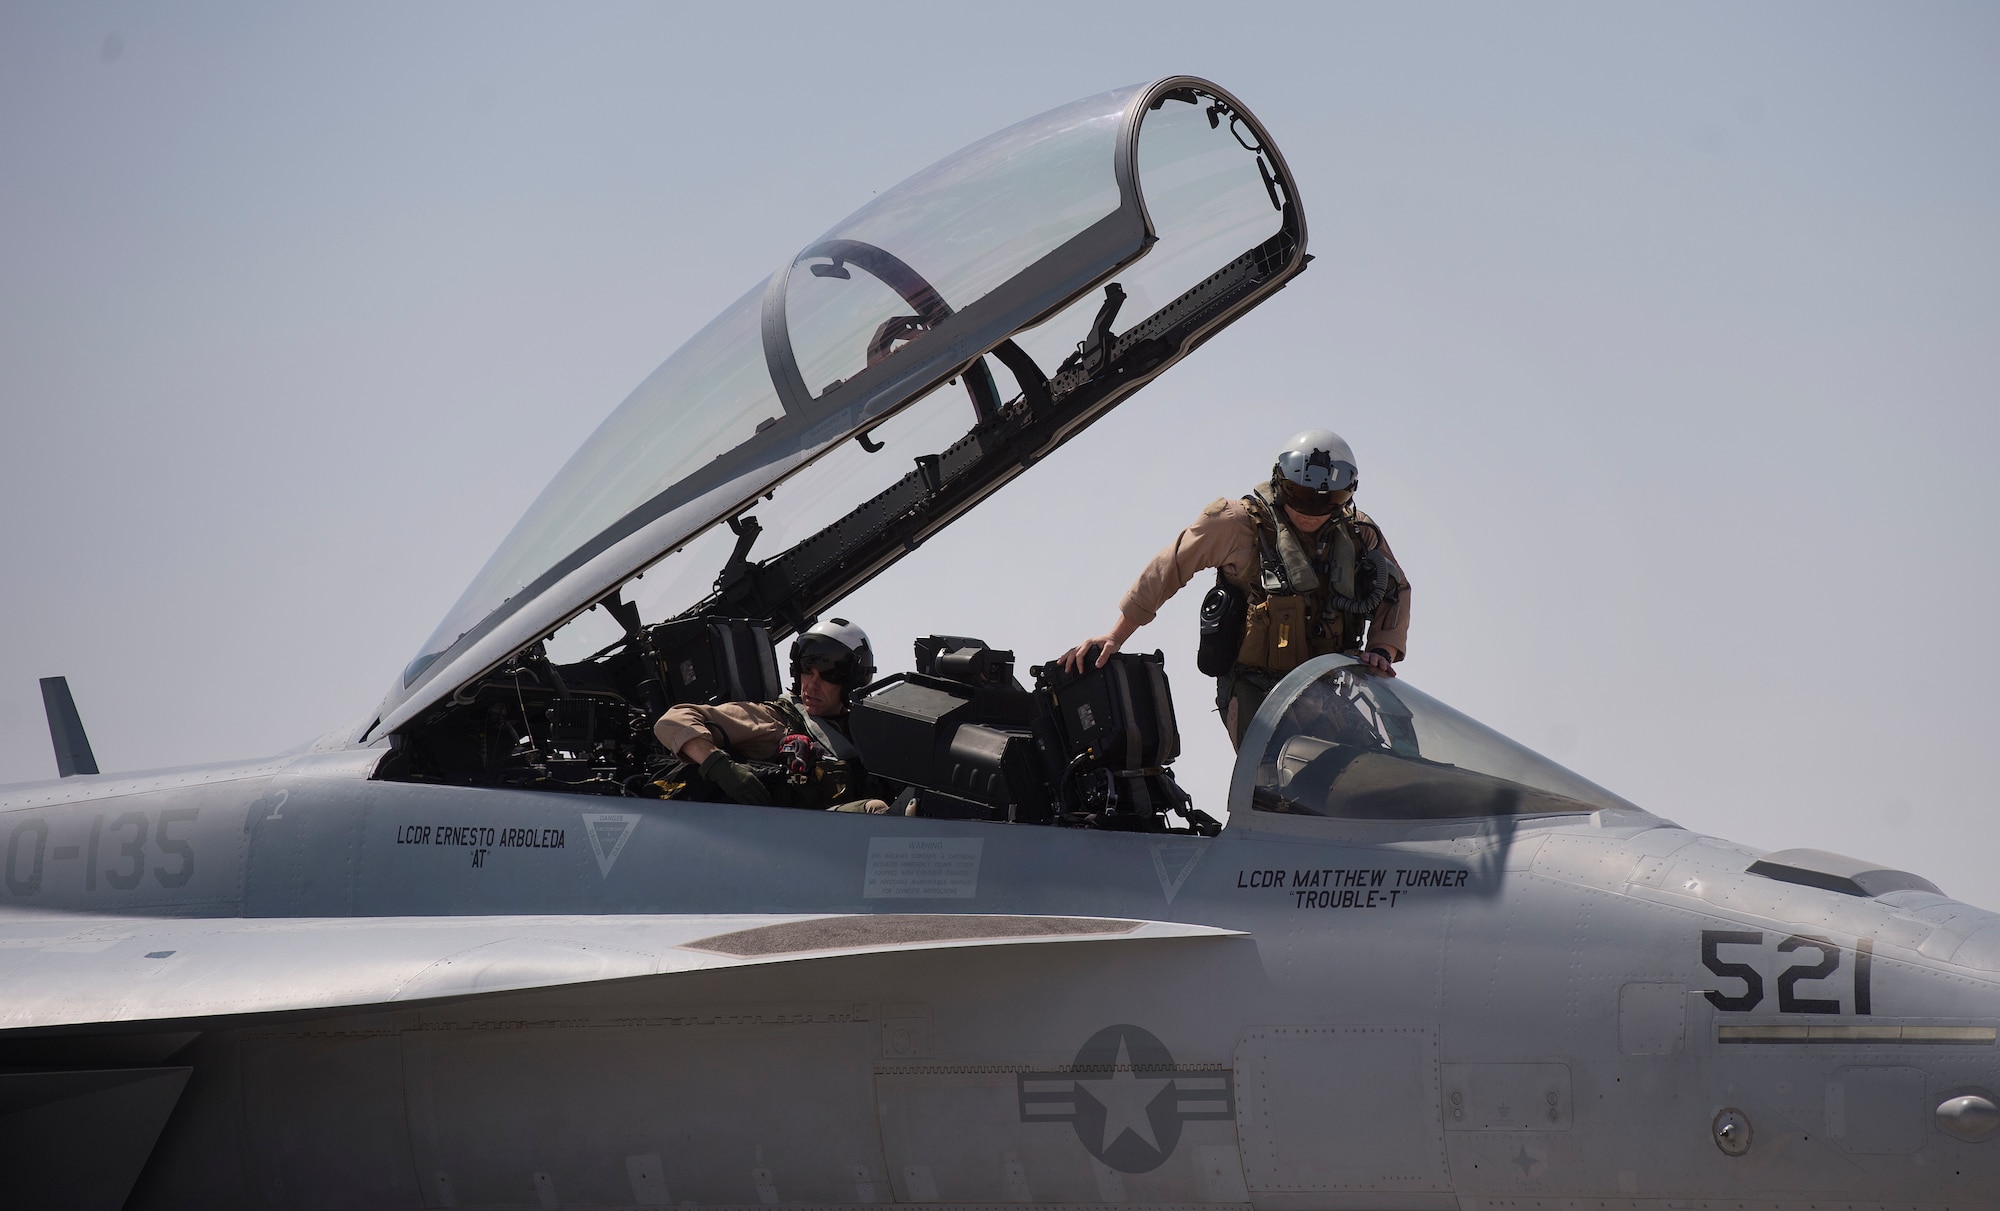 U.S. Navy EA-18G Growler pilots from the Electronic Attack Squadron 135 (VAQ-135) “Black Ravens,” get into an EA-18G Growler March 2, 2019, at Al Udeid Air Base, Qatar. VAQ-135 is deployed to the U.S. 5th Fleet area of operations in support of naval operations to ensure maritime stability and security in the Central Region, connecting the Mediterranean and the Pacific through the western Indian Ocean and three strategic choke points. The squadron’s EA-18G Growlers employ an electronic attack capability in support of combat missions across the region. (U.S. Air Force photo by Tech. Sgt. Christopher Hubenthal)